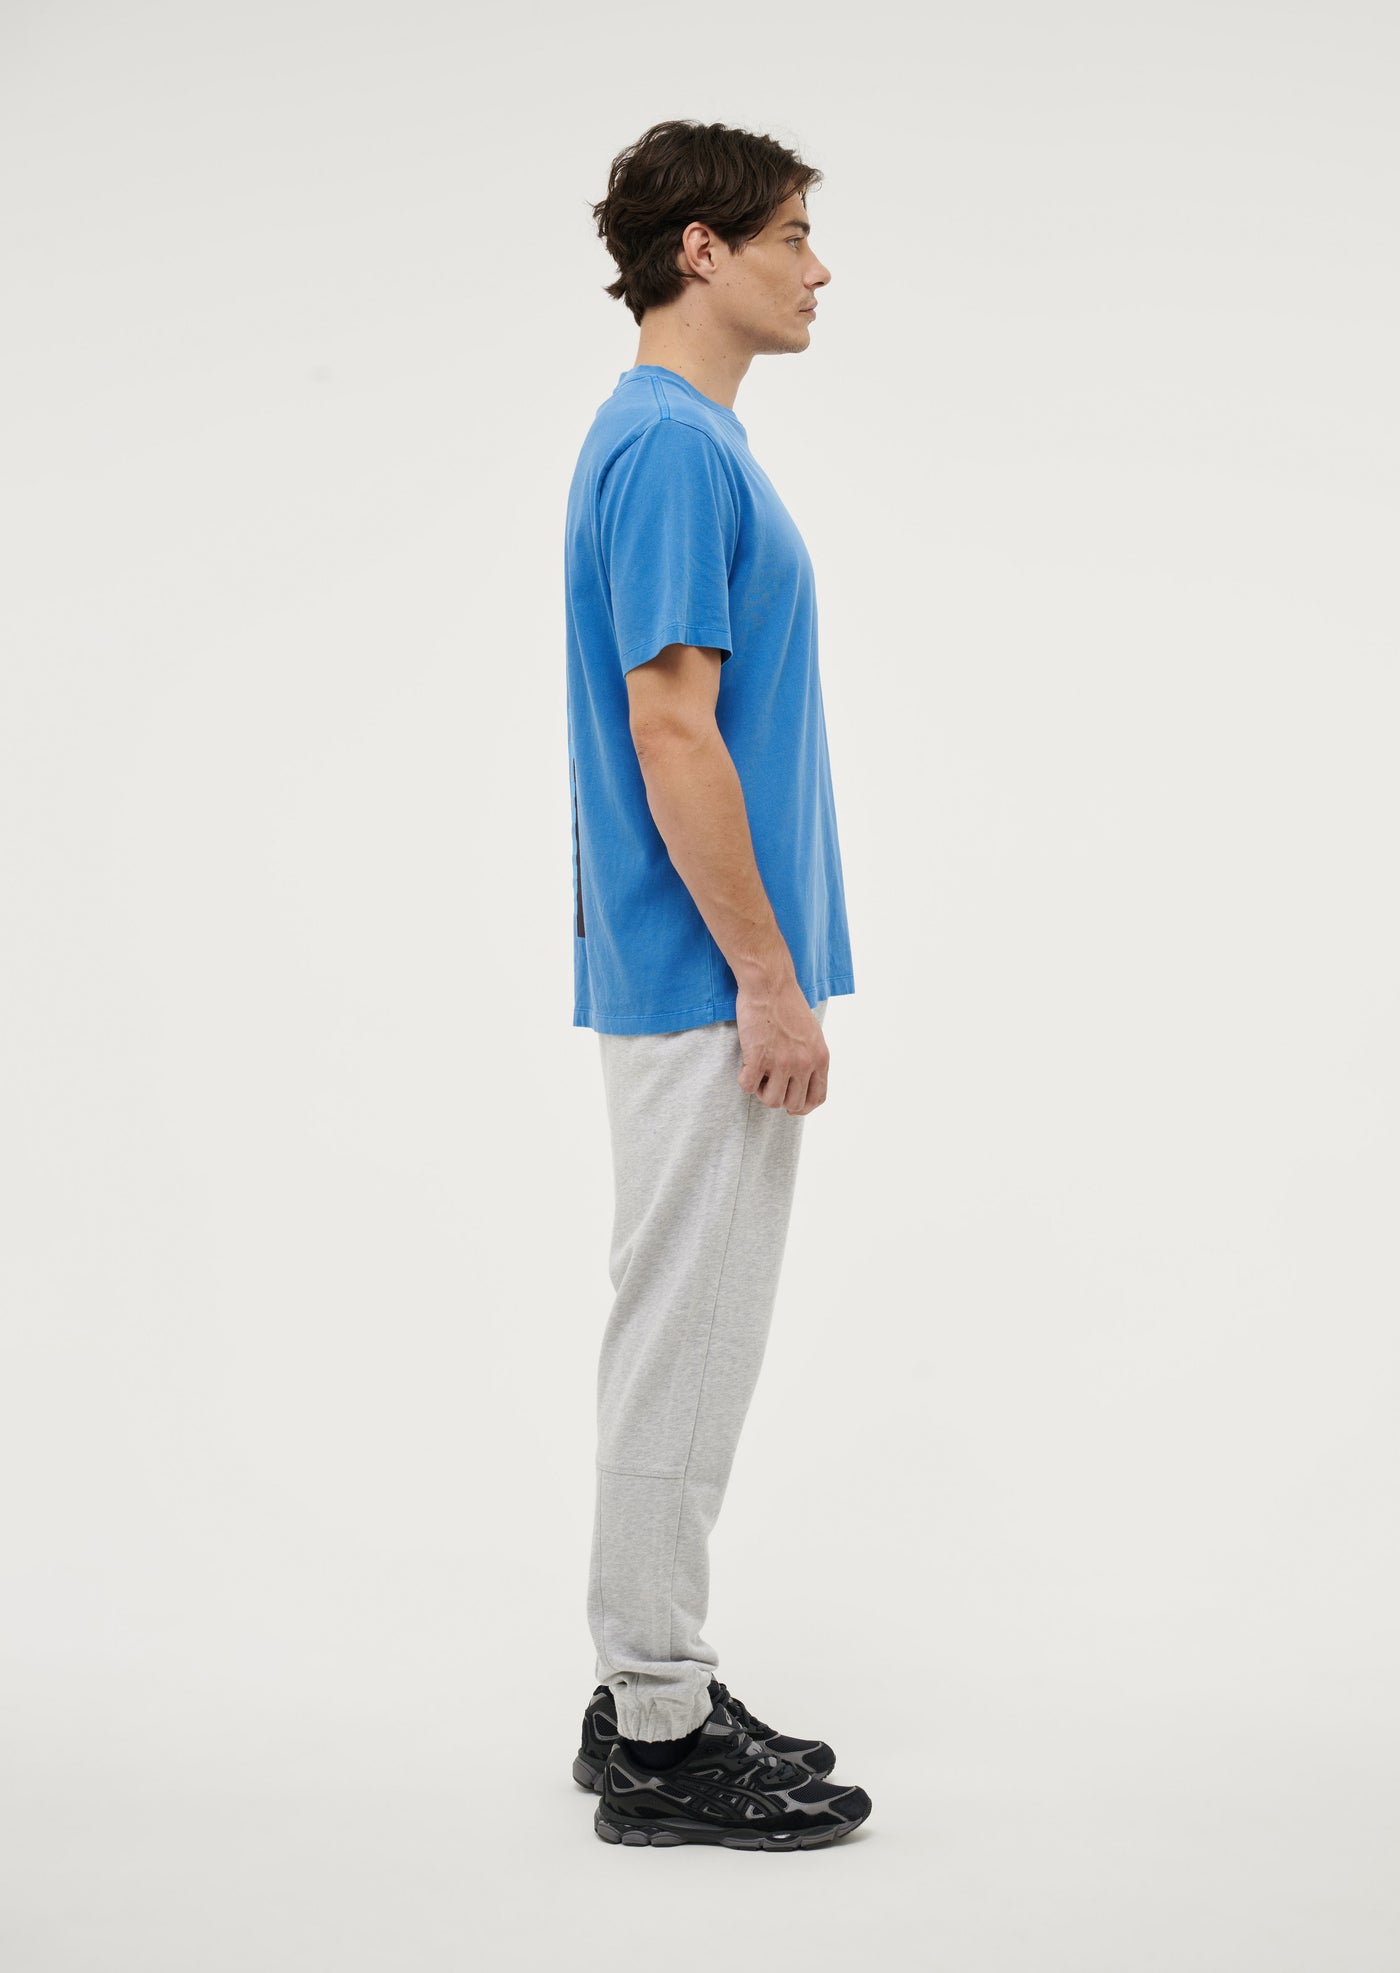 FORTITUDE TRACKPANT IN GREY MARL